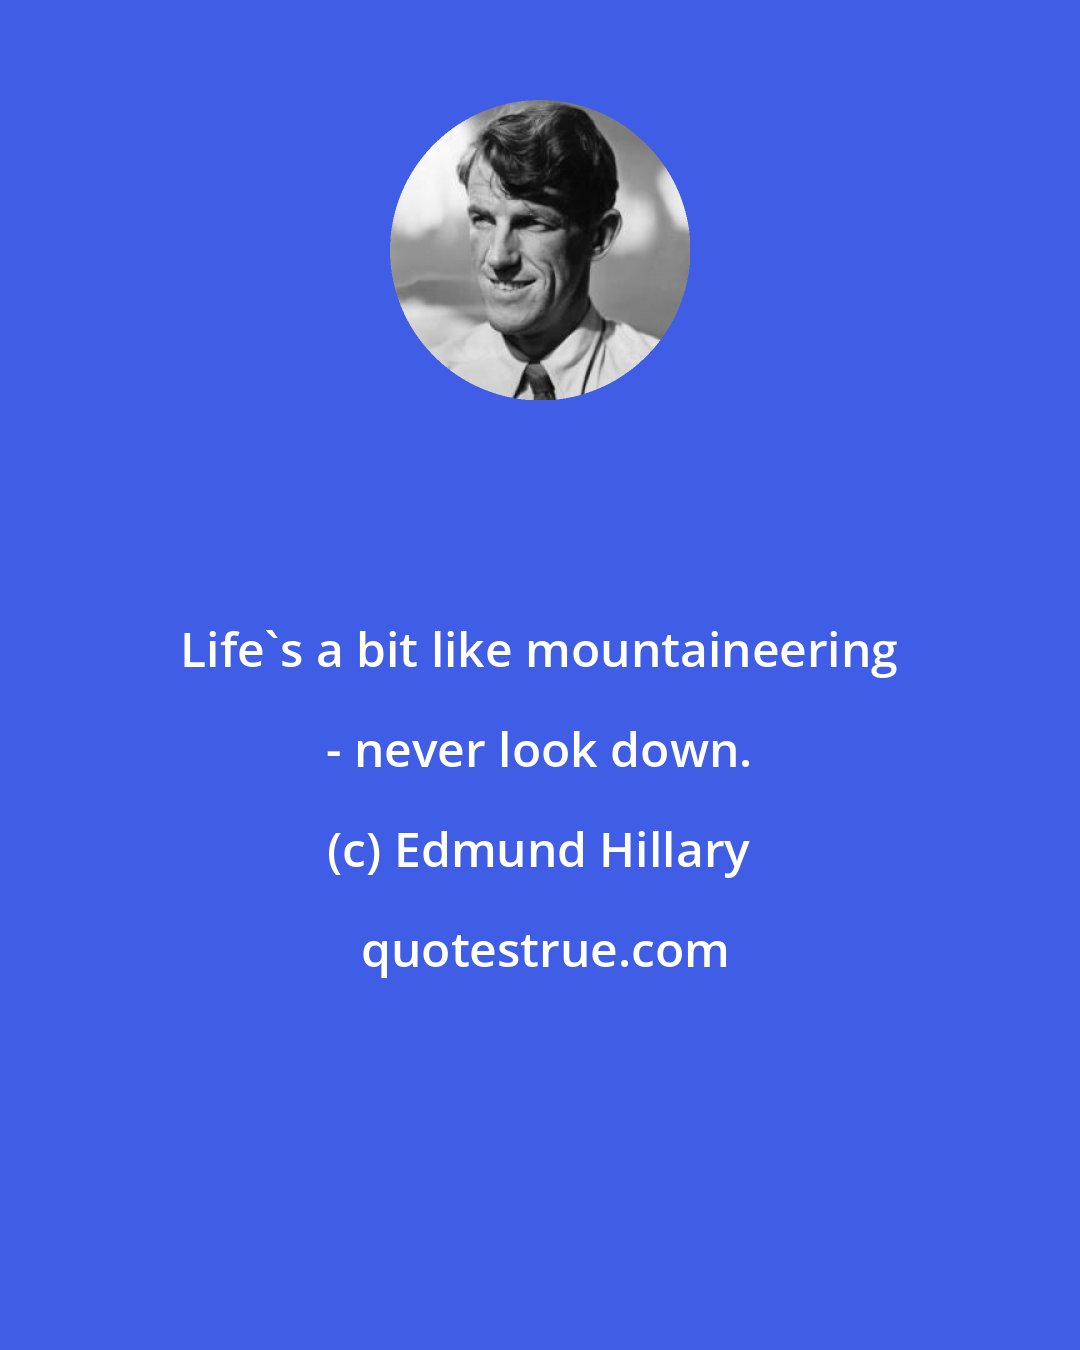 Edmund Hillary: Life's a bit like mountaineering - never look down.